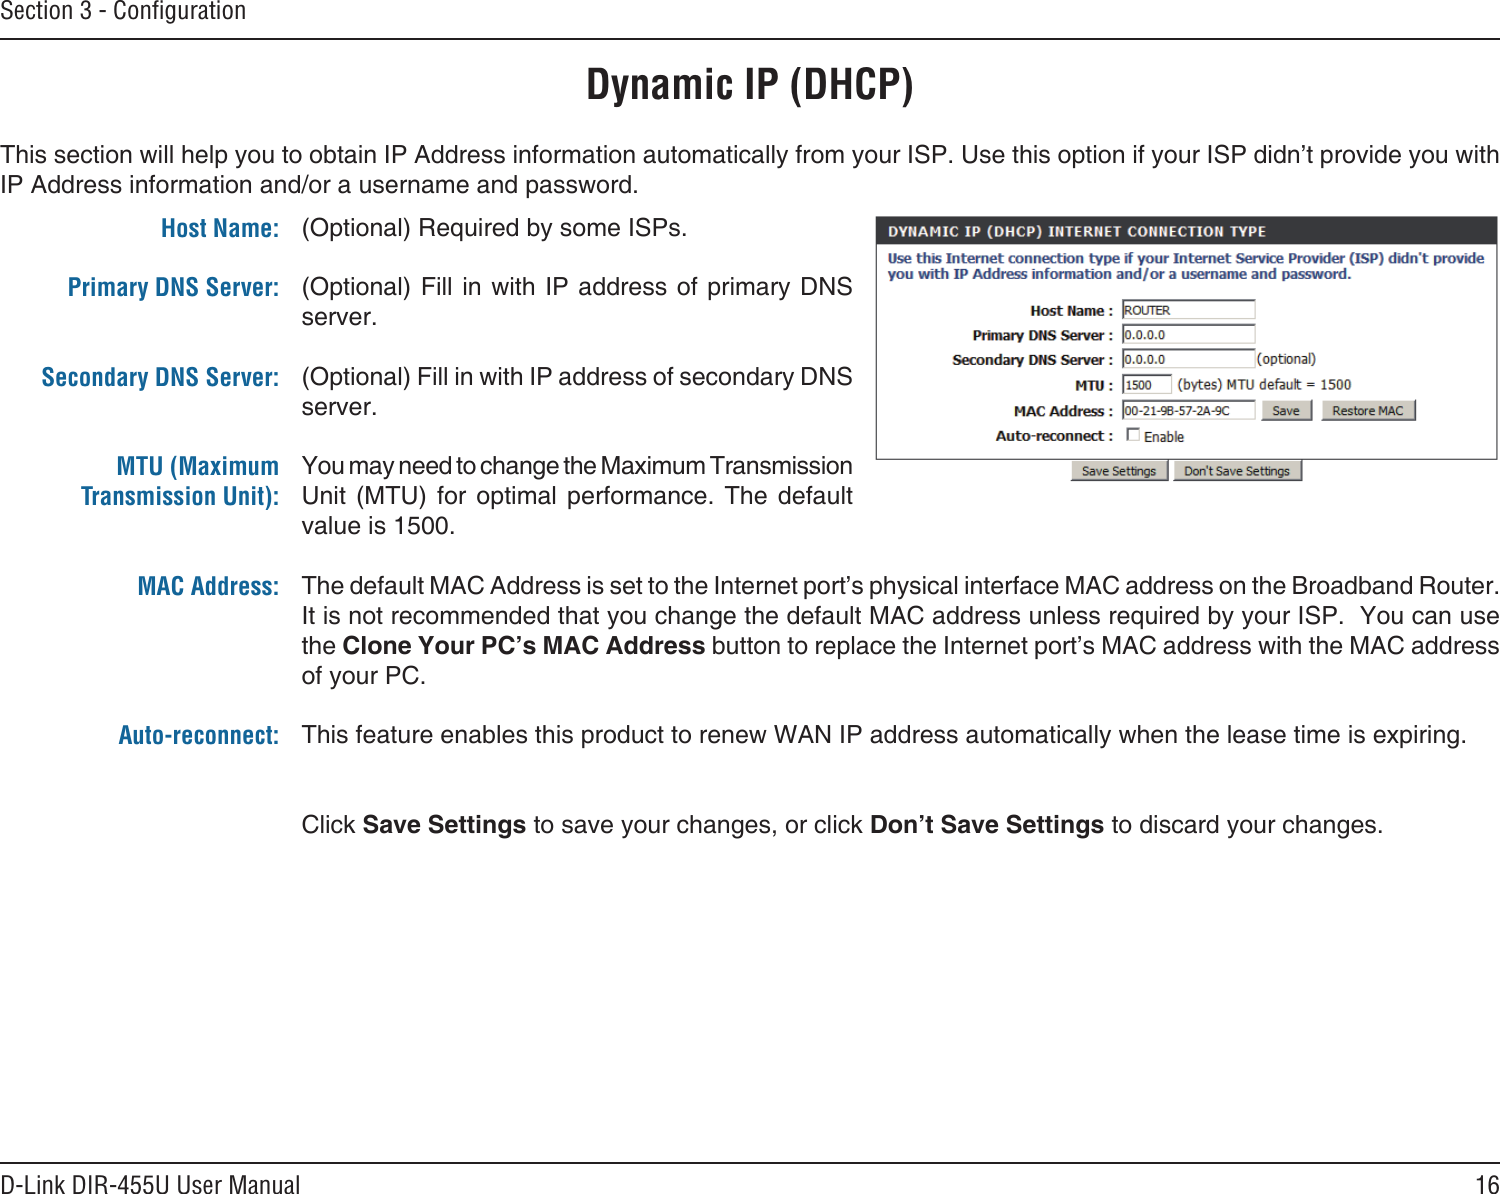 16D-Link DIR-455U User ManualSection 3 - ConﬁgurationDynamic IP (DHCP)(Optional) Required by some ISPs.(Optional) Fill  in with IP address of primary DNS server.(Optional) Fill in with IP address of secondary DNS server.You may need to change the Maximum Transmission Unit  (MTU)  for  optimal  performance.  The  default value is 1500.The default MAC Address is set to the Internet port’s physical interface MAC address on the Broadband Router. It is not recommended that you change the default MAC address unless required by your ISP.  You can use the Clone Your PC’s MAC Address button to replace the Internet port’s MAC address with the MAC address of your PC.This feature enables this product to renew WAN IP address automatically when the lease time is expiring. Click Save Settings to save your changes, or click Don’t Save Settings to discard your changes.This section will help you to obtain IP Address information automatically from your ISP. Use this option if your ISP didn’t provide you with IP Address information and/or a username and password.Host Name:Primary DNS Server: Secondary DNS Server: MTU (Maximum Transmission Unit): MAC Address: Auto-reconnect: